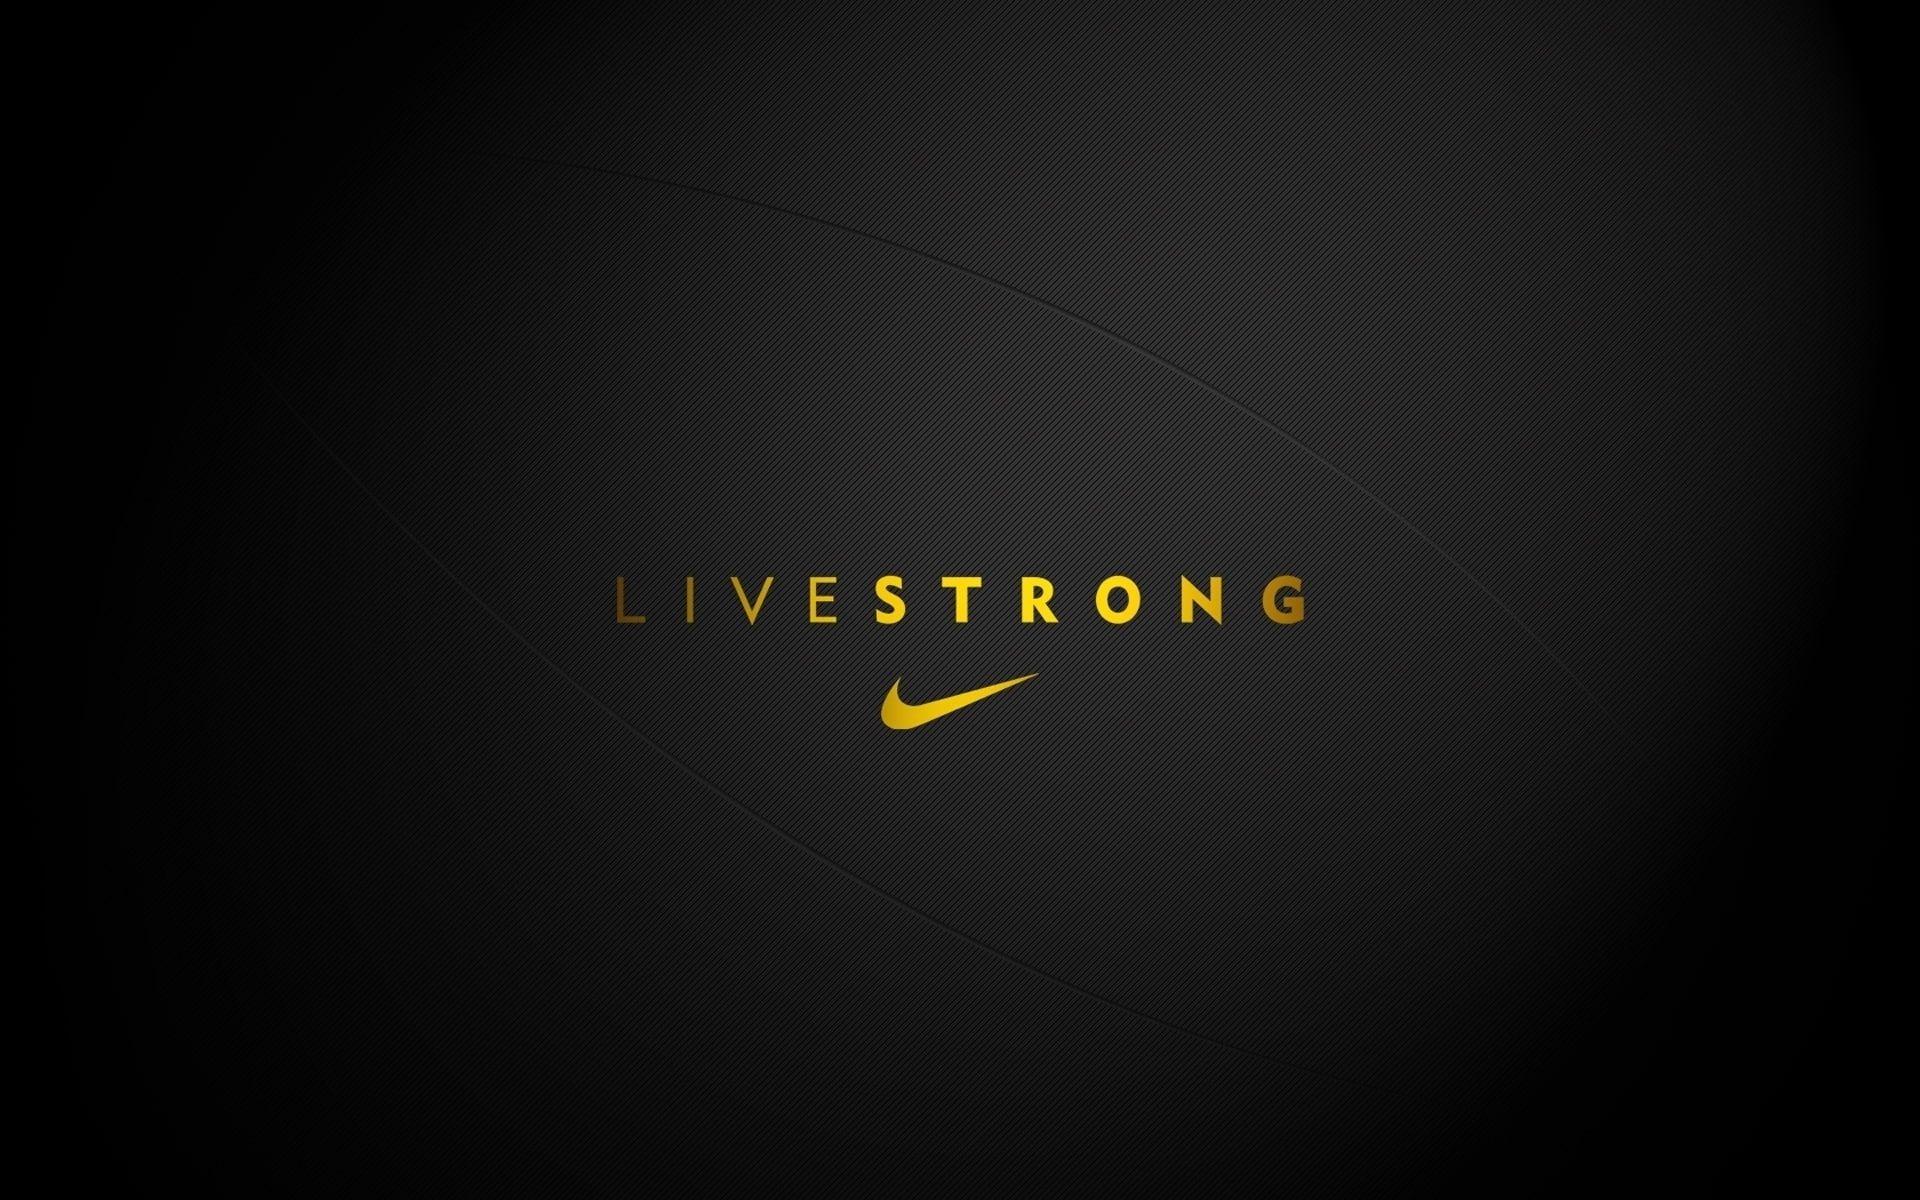 Live Strong Nike #brand #motto #logo #nike #background P